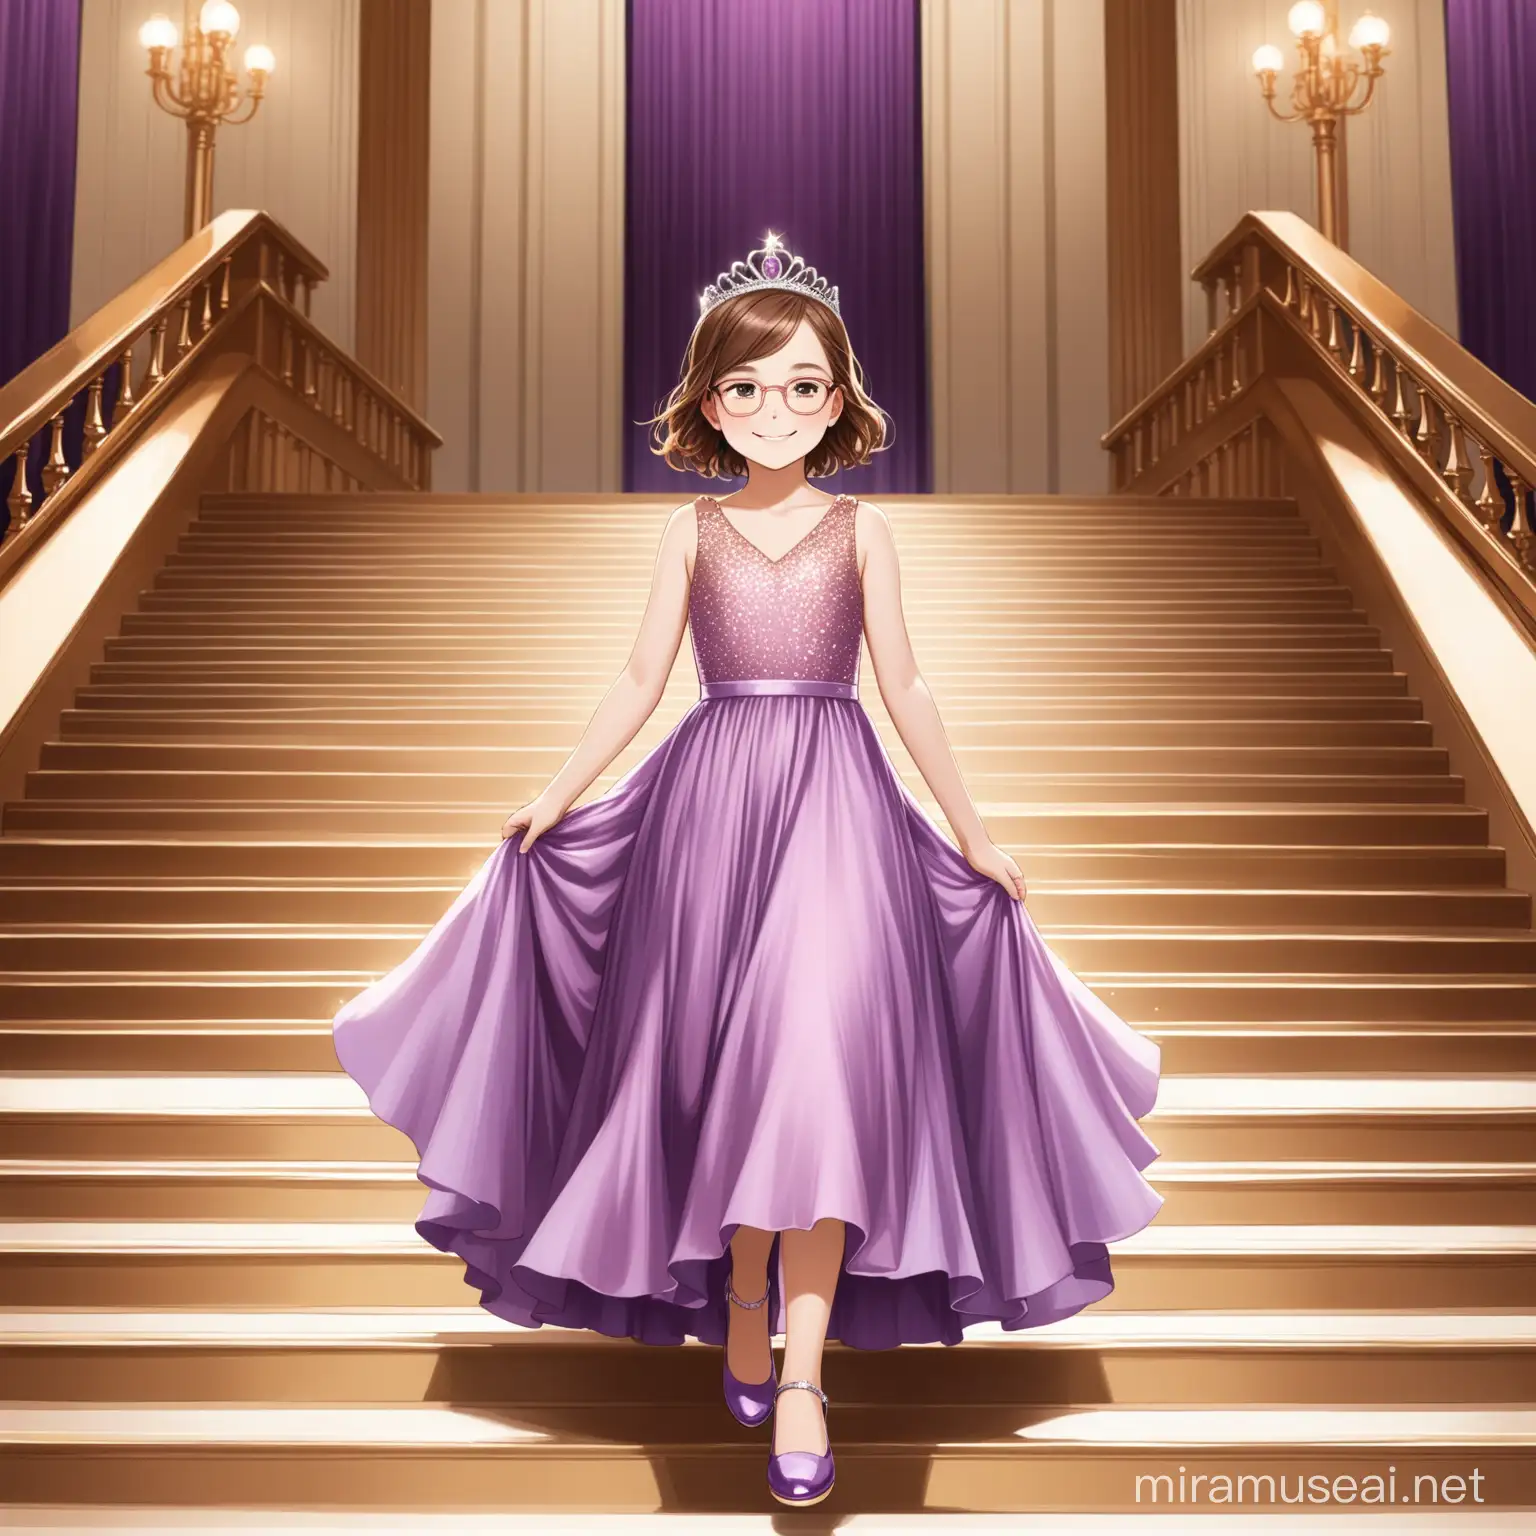 12 year old girl, short brown hair, brown eyes, rose gold glasses, smiling, sleeveless purple evening gown, silver tiara, purple shoes, walking down a grand staircase